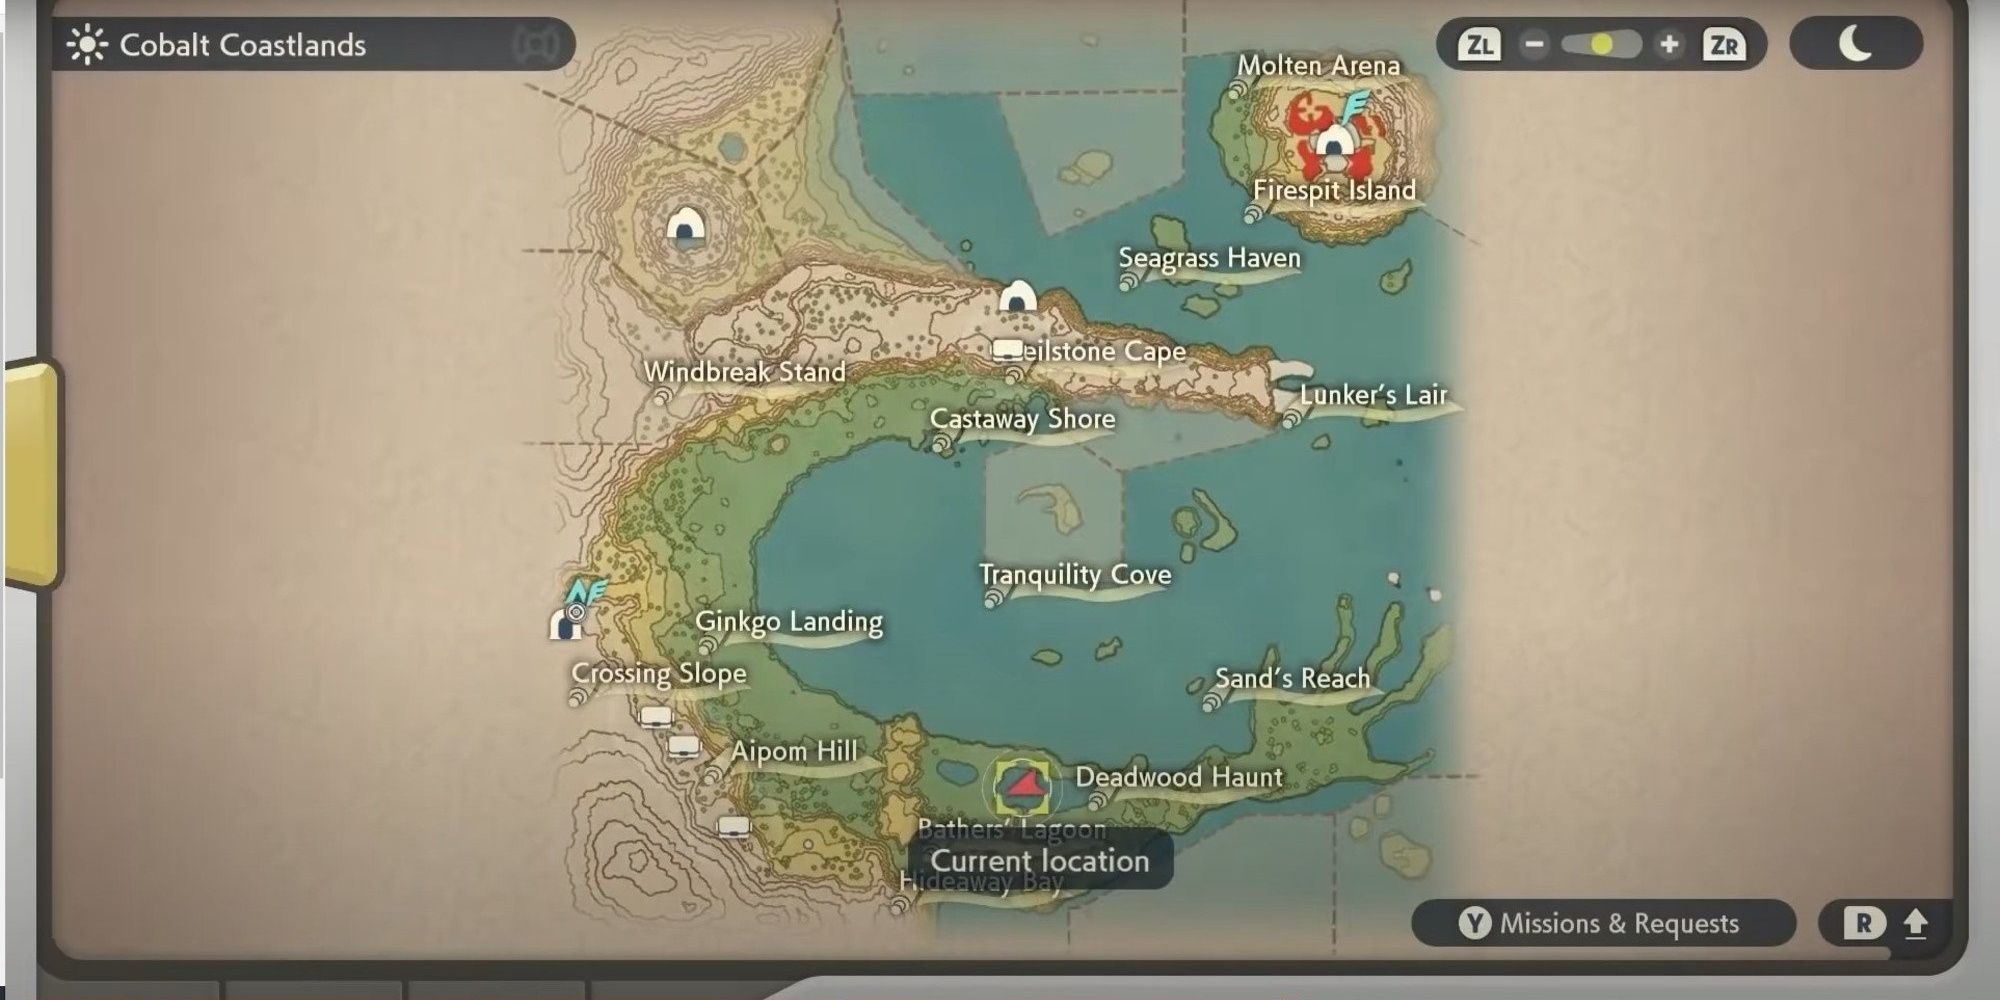 The Cobalt Coastlands map shows the various areas in this region as well as the Pokemon Legends Arceus character's current location.